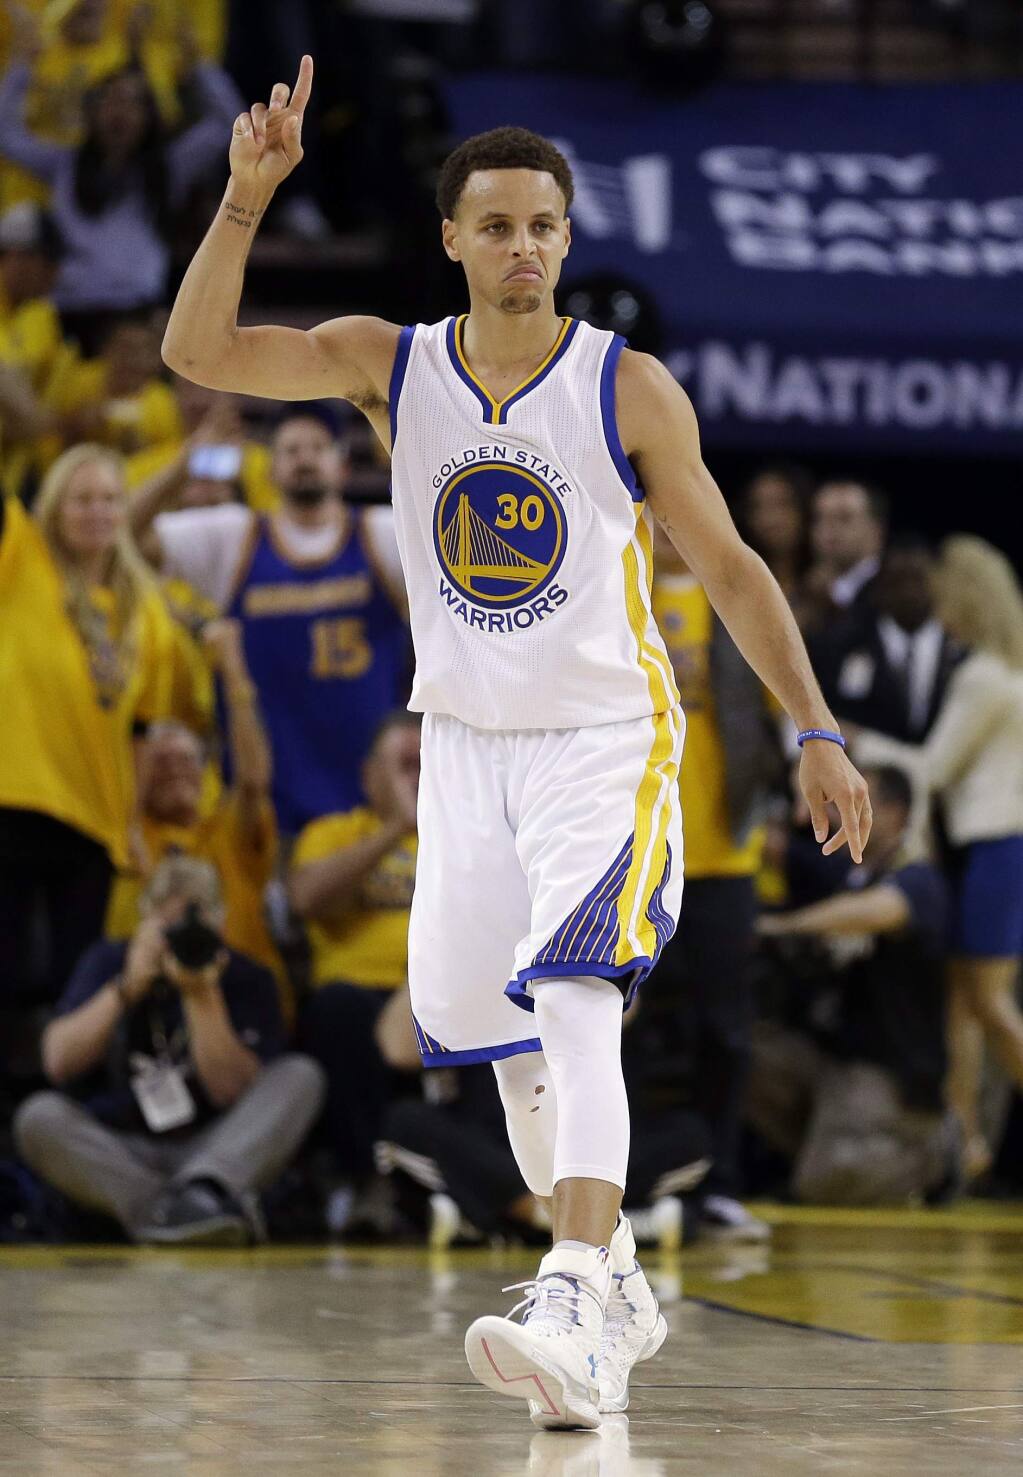 WATCH: Steph Curry's 2015 championship journey in 10 minutes 